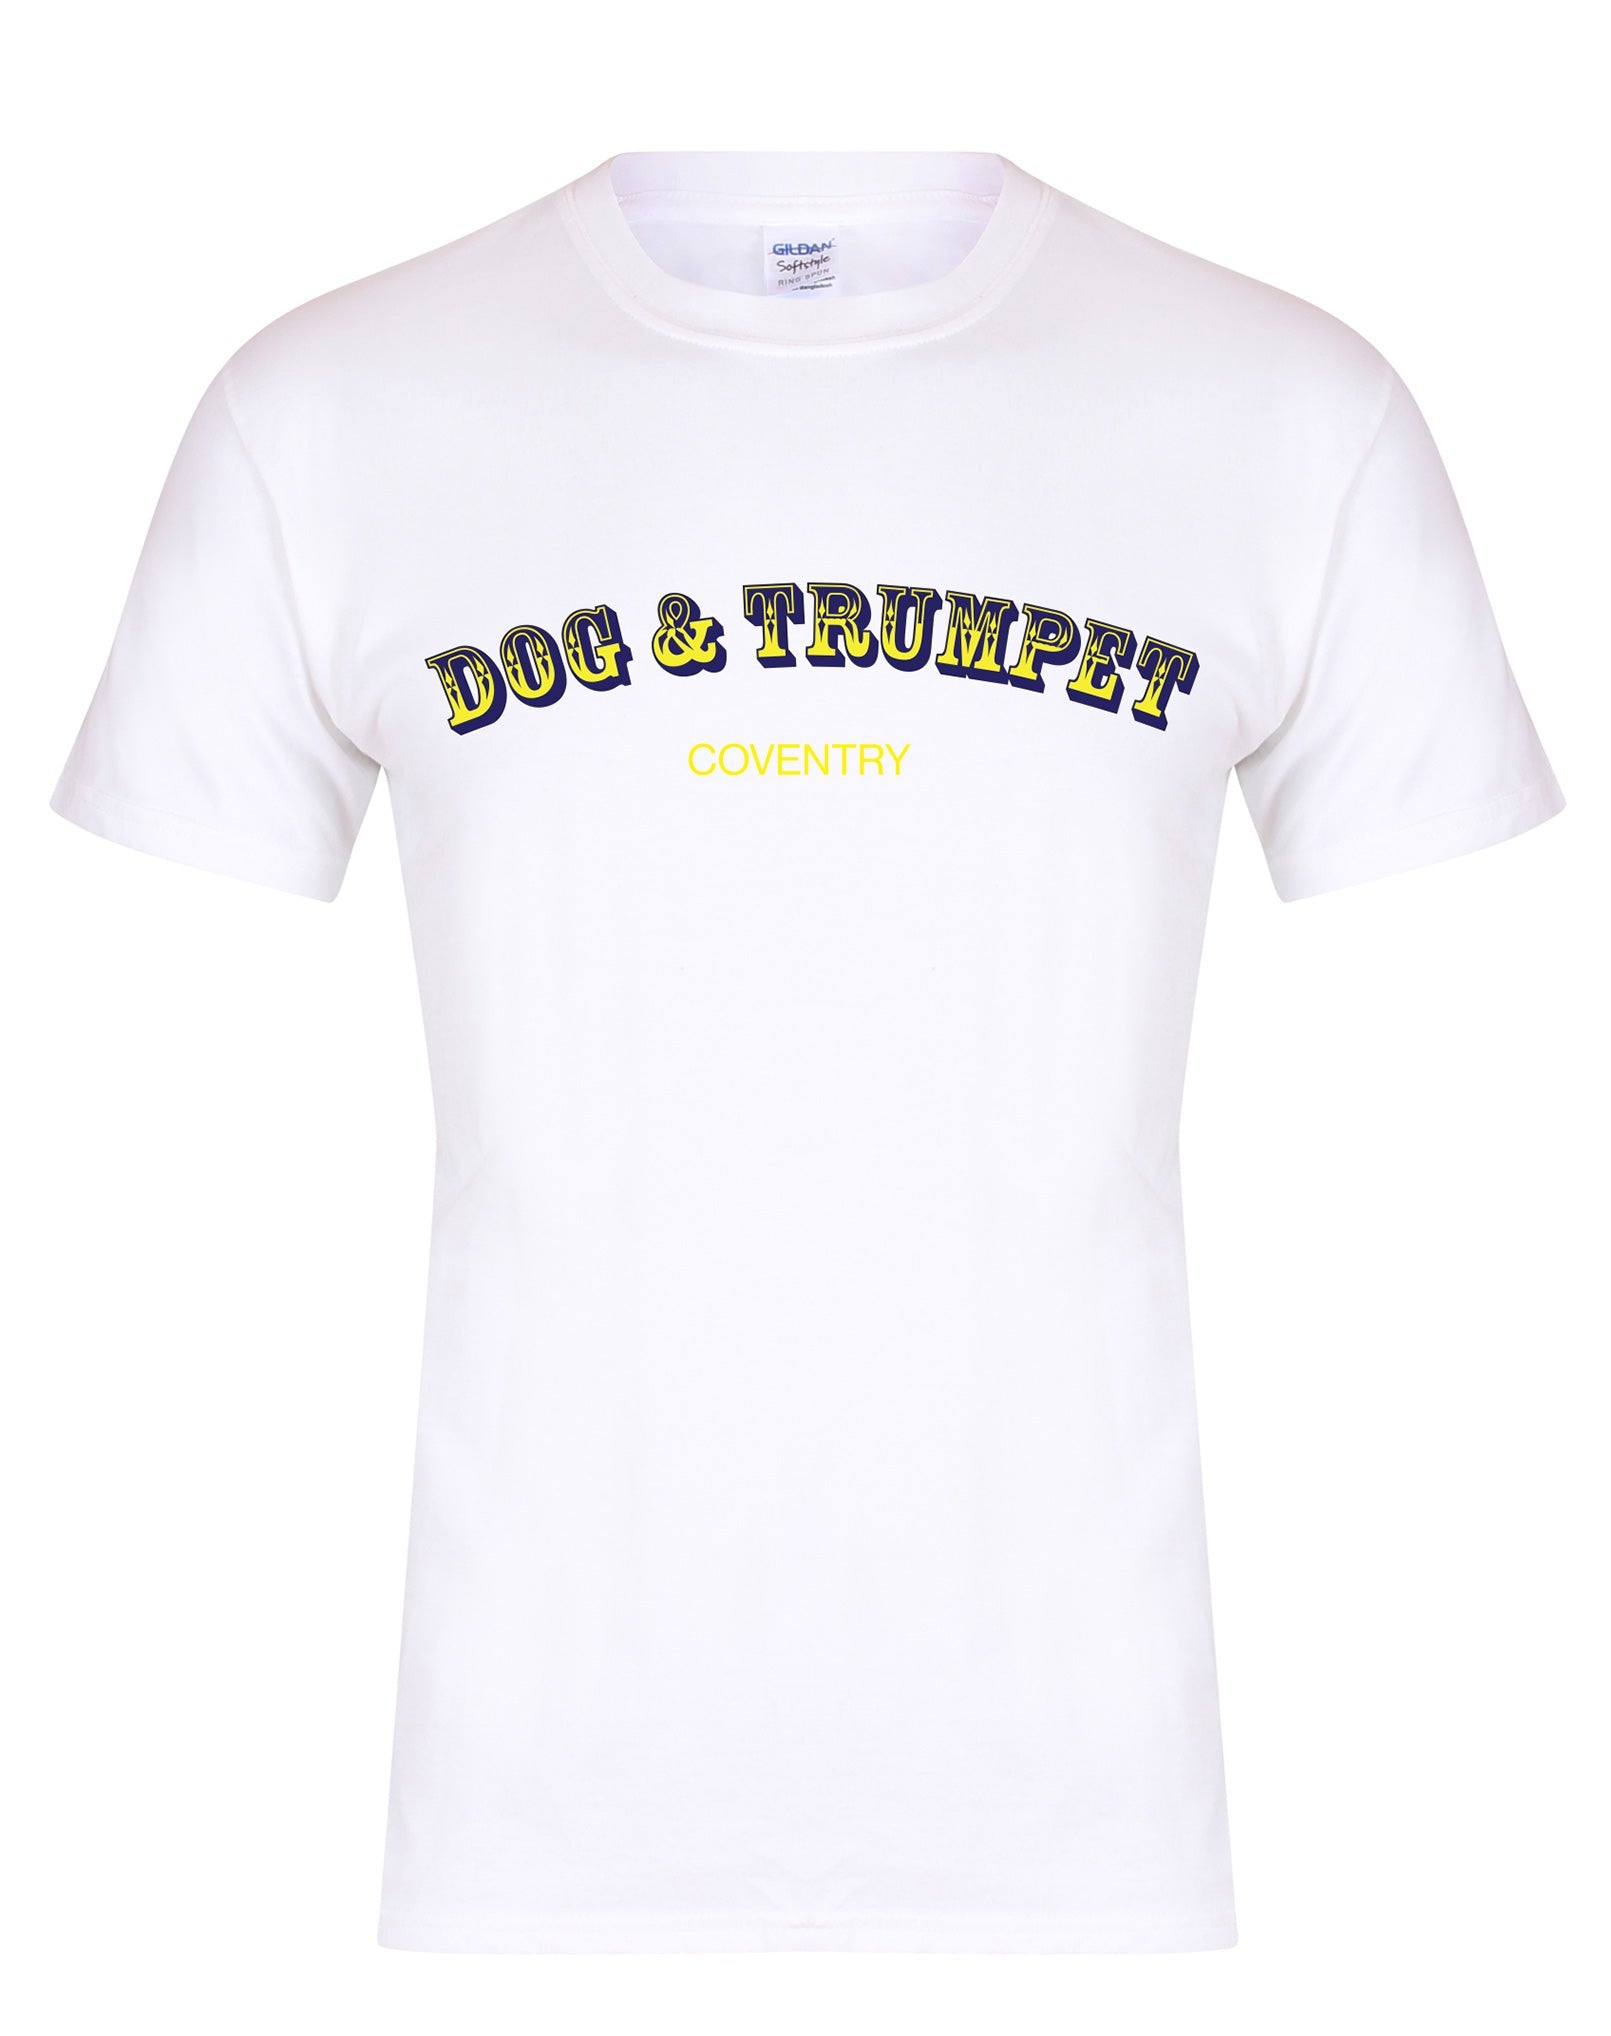 Dog & Trumpet unisex fit T-shirt - various colours - Dirty Stop Outs